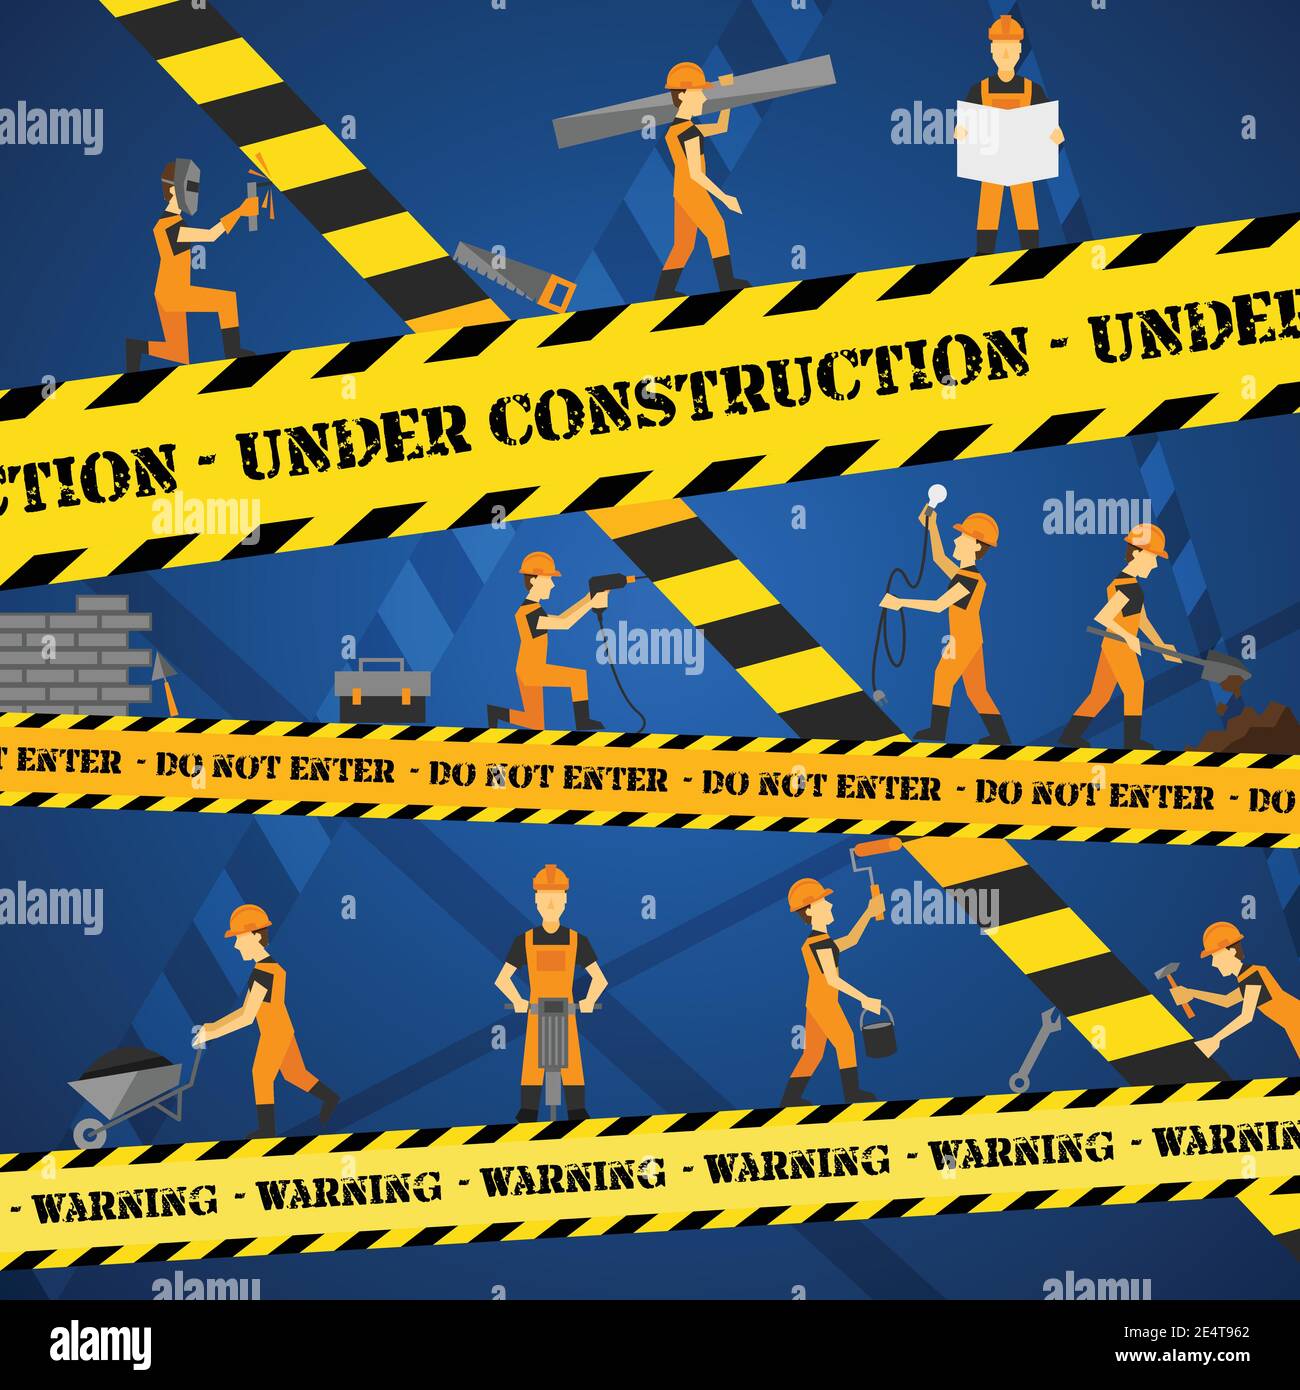 Under construction poster with workmen and yellow restriction line vector illustration Stock Vector